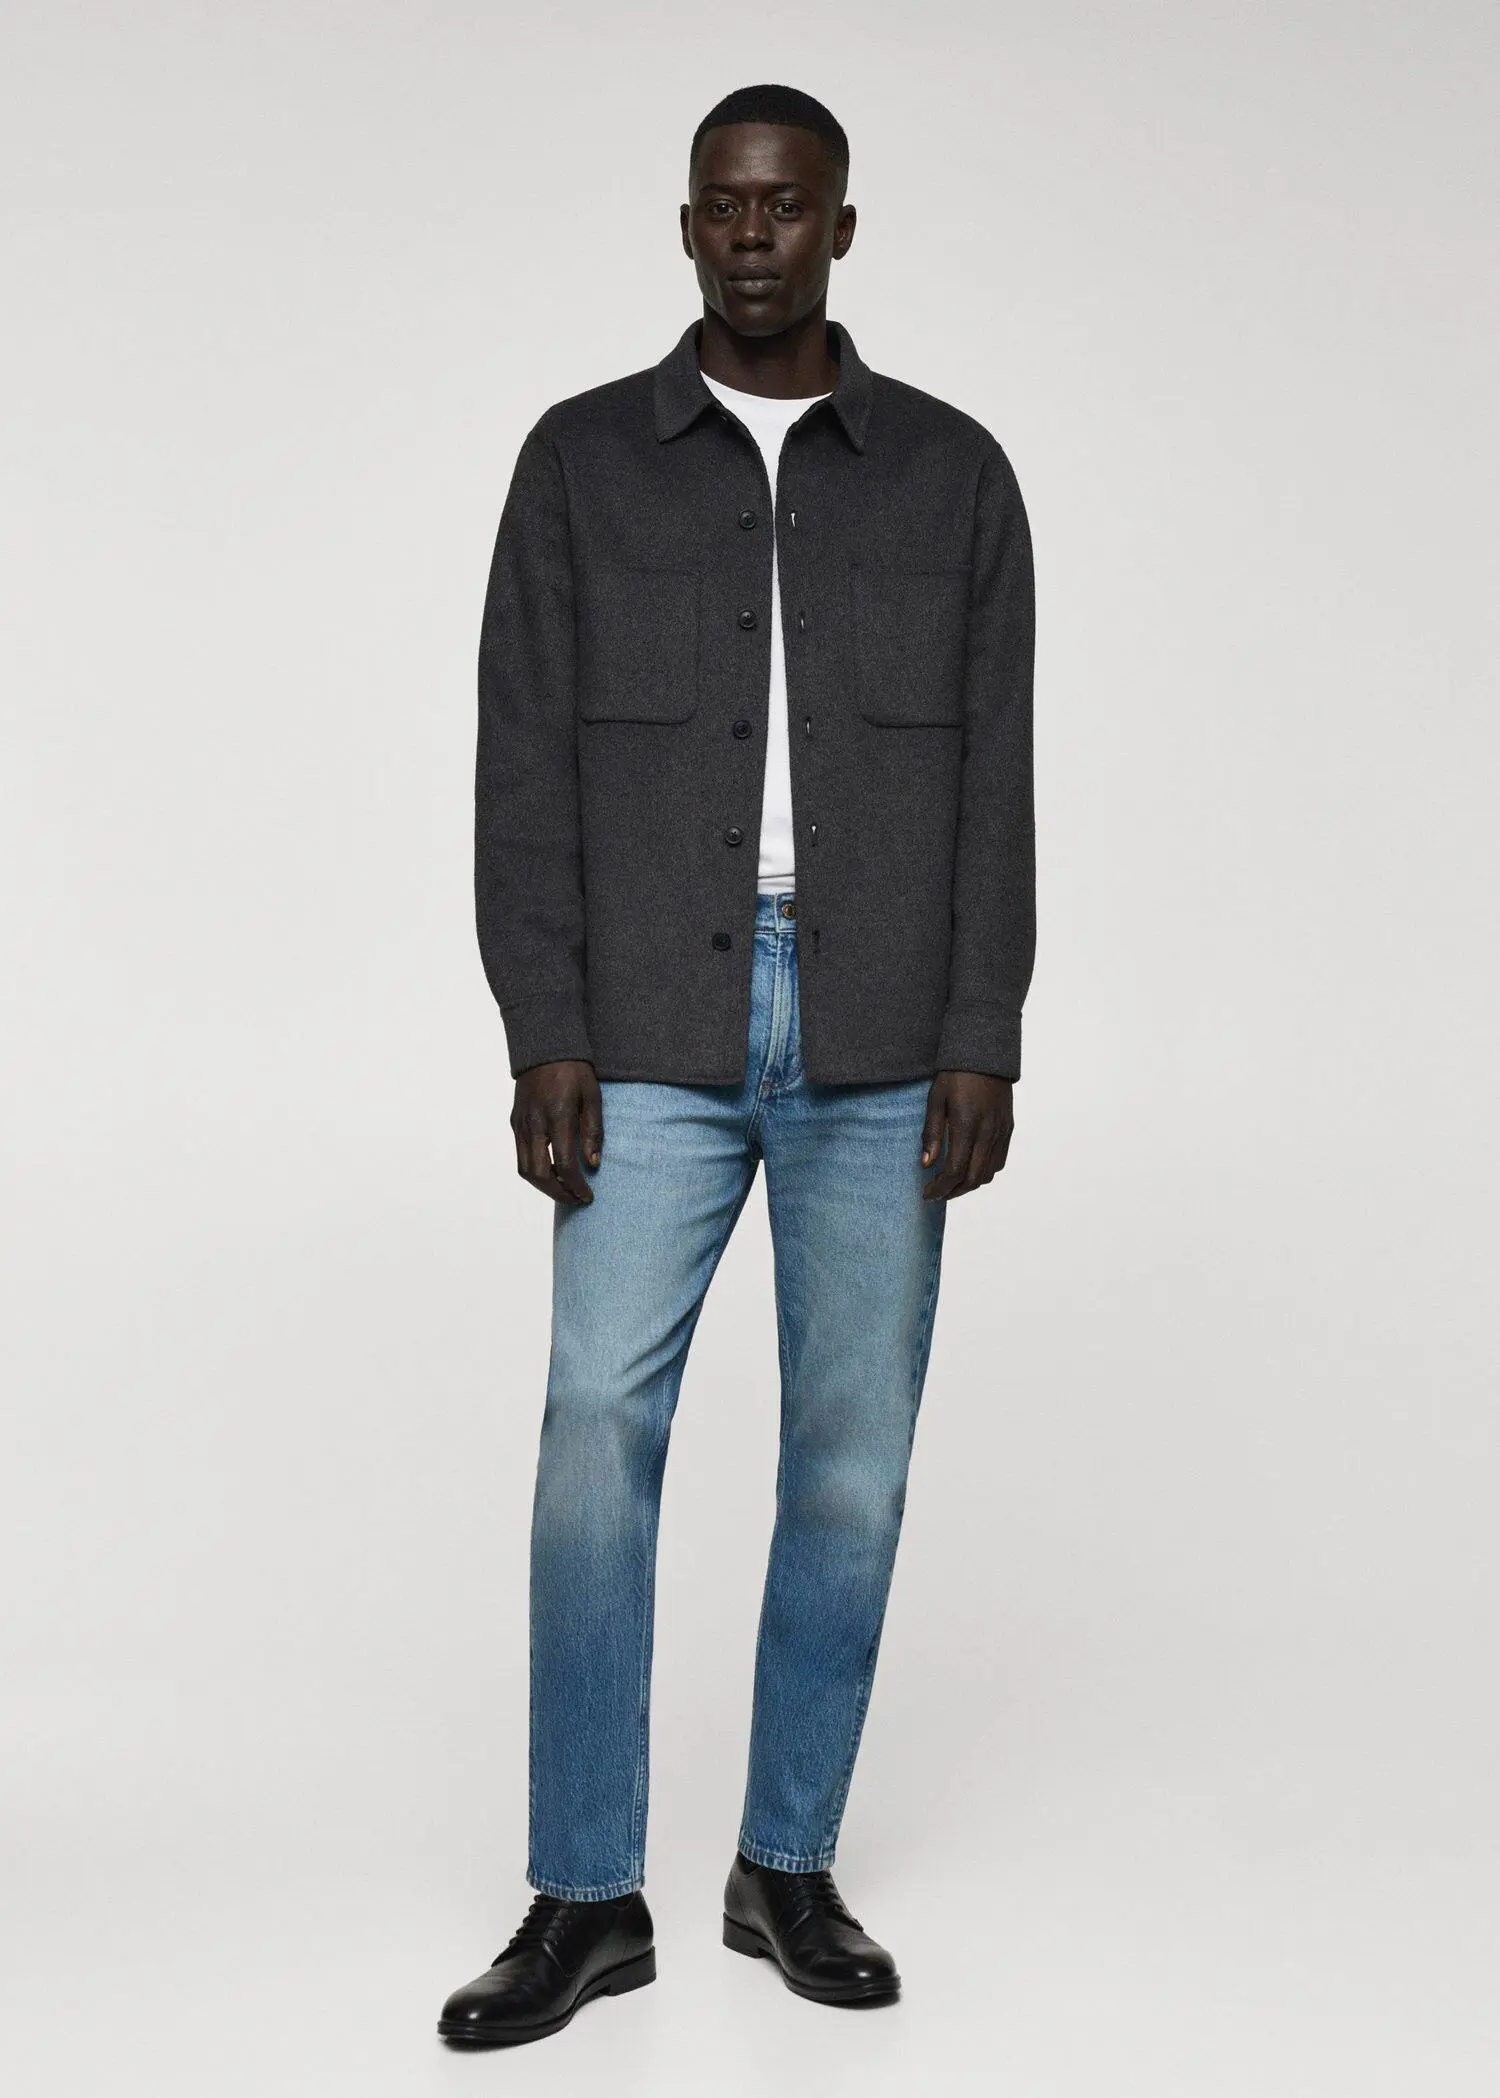 Mango Jeans Ben tappered fit. 1